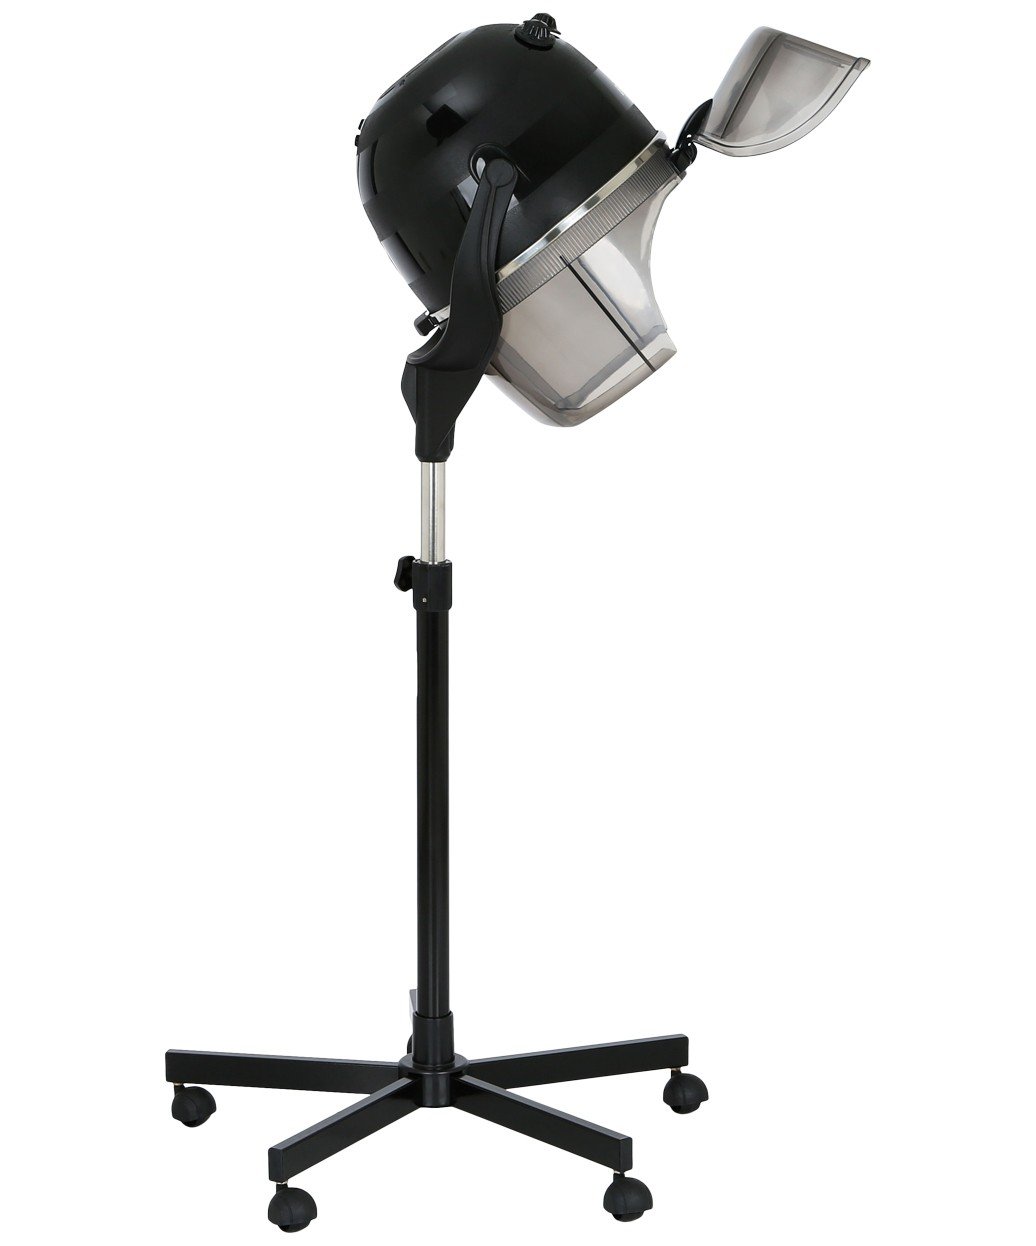 Meredith Hair Dryer on Casters